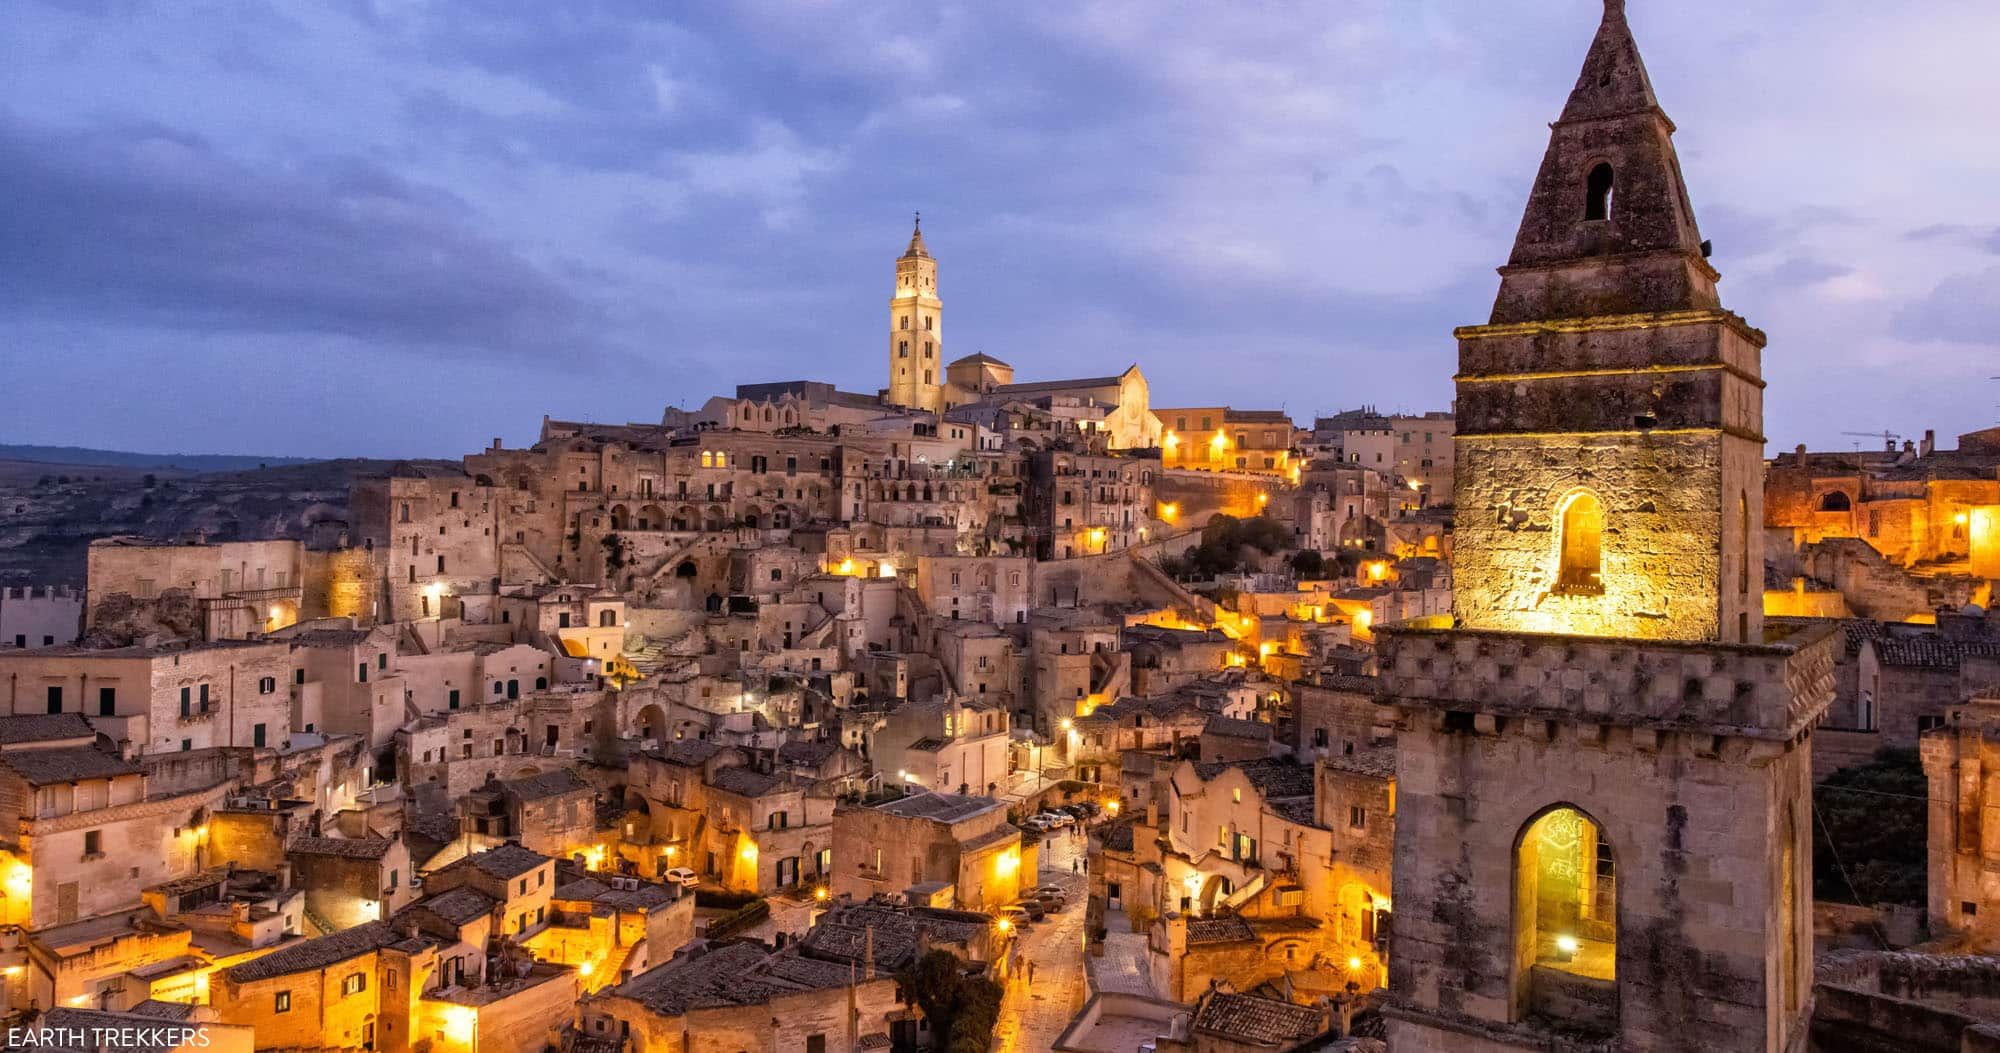 Featured image for “Matera Bucket List: 25 Best Things to Do in Matera”